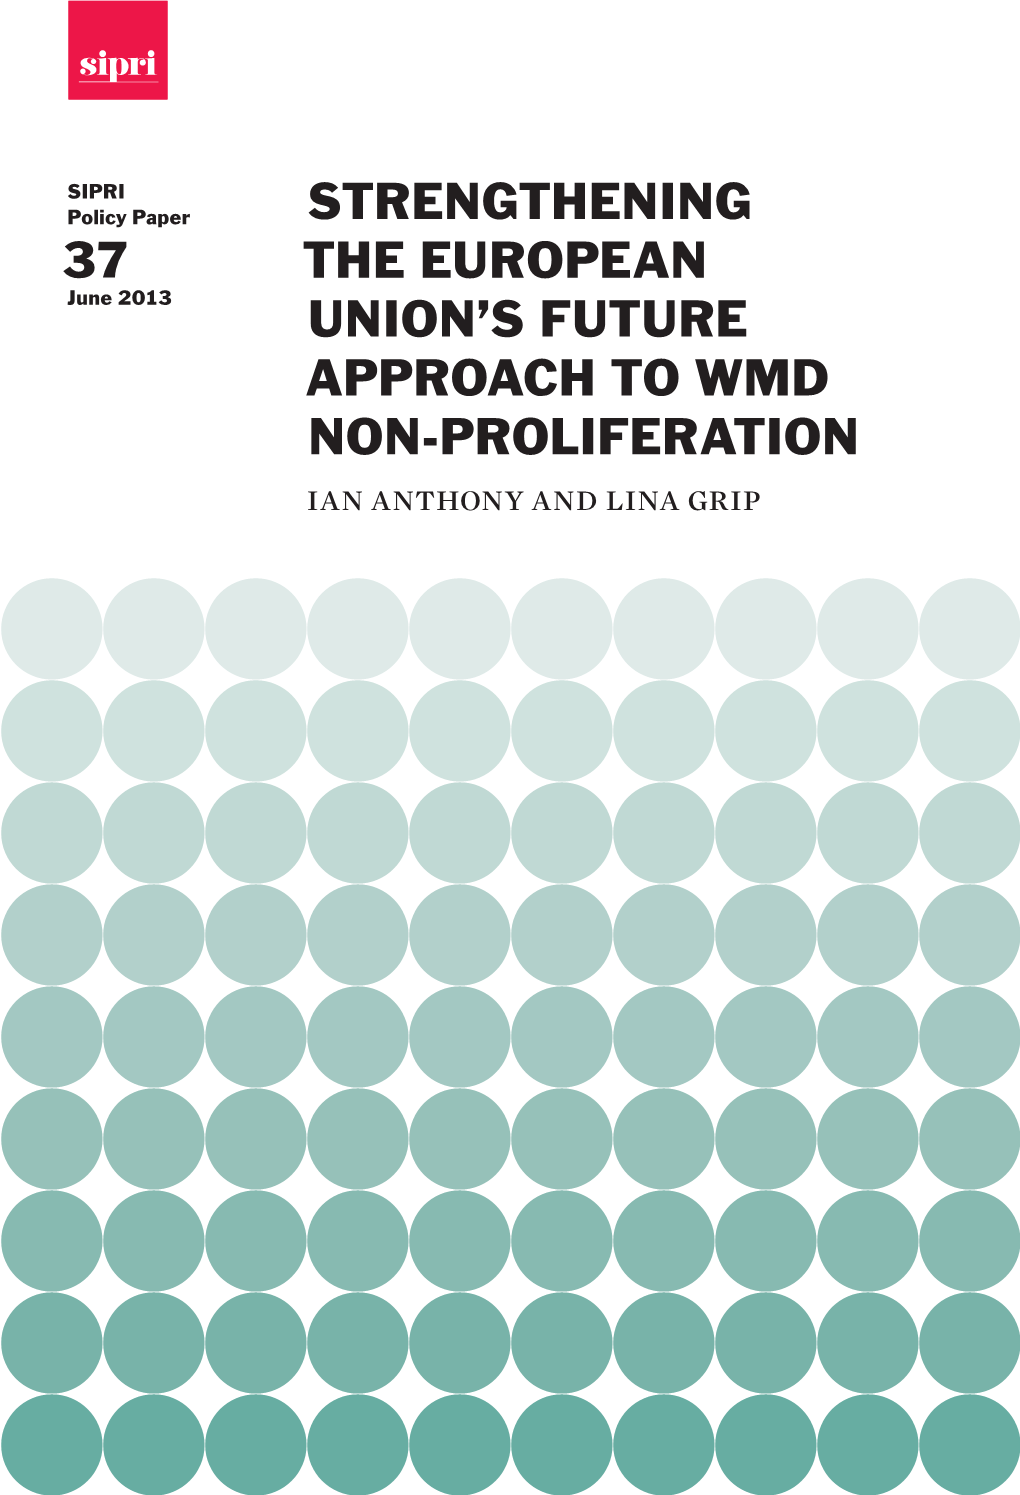 Strengthening the European Union's Future Approach to WMD Non